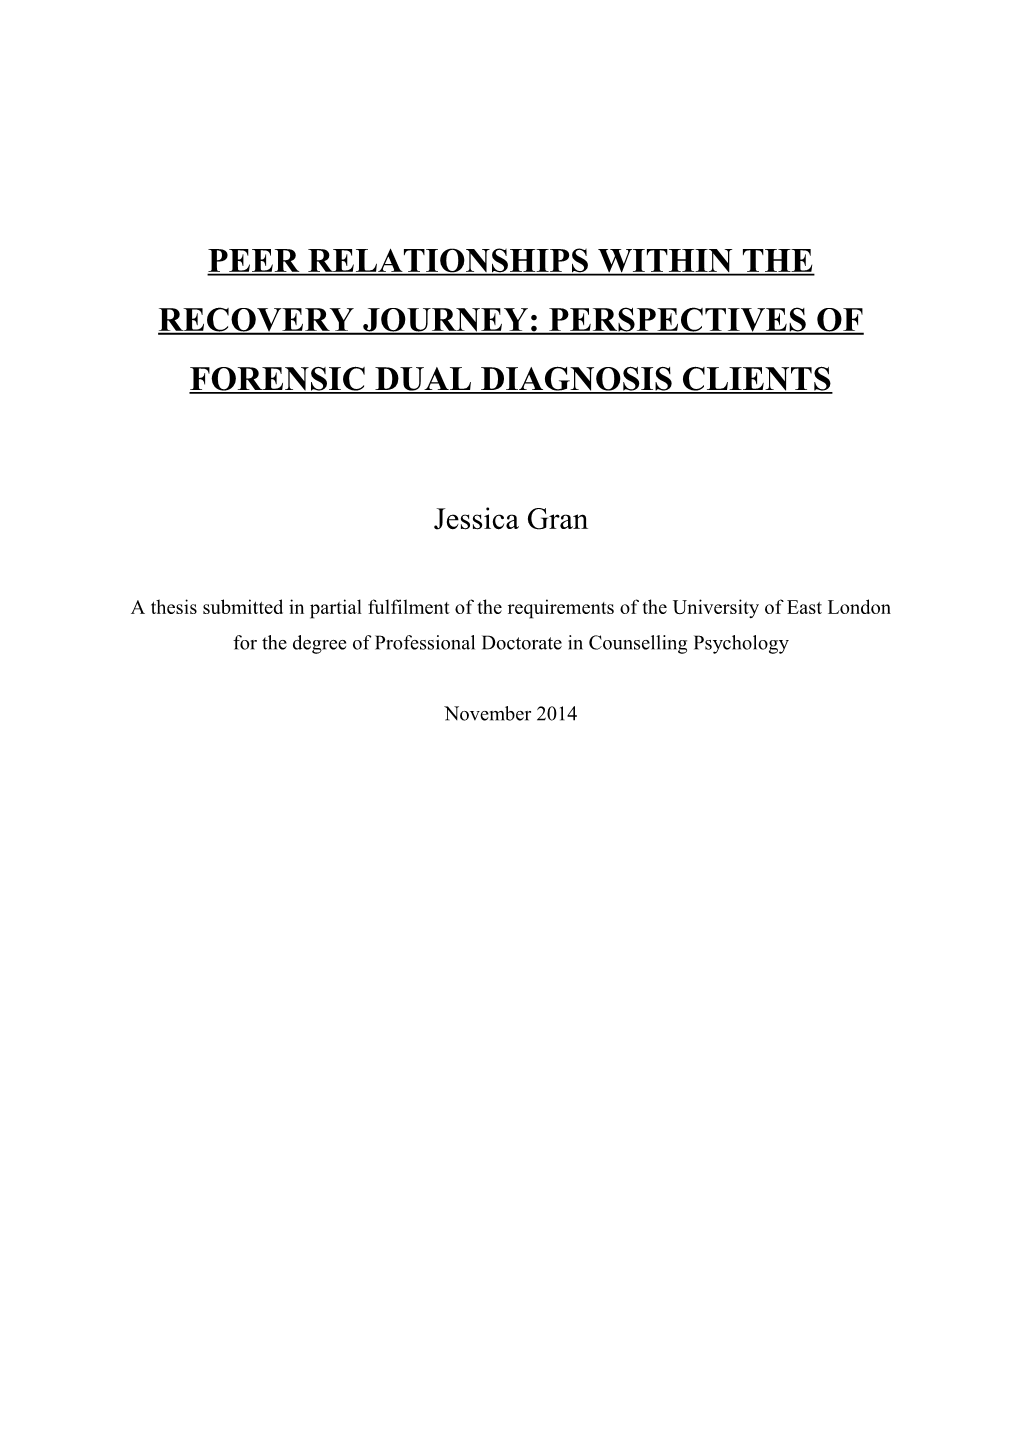 Peer Relationships Within the Recovery Journey: Perspectives of Forensic Dual Diagnosis